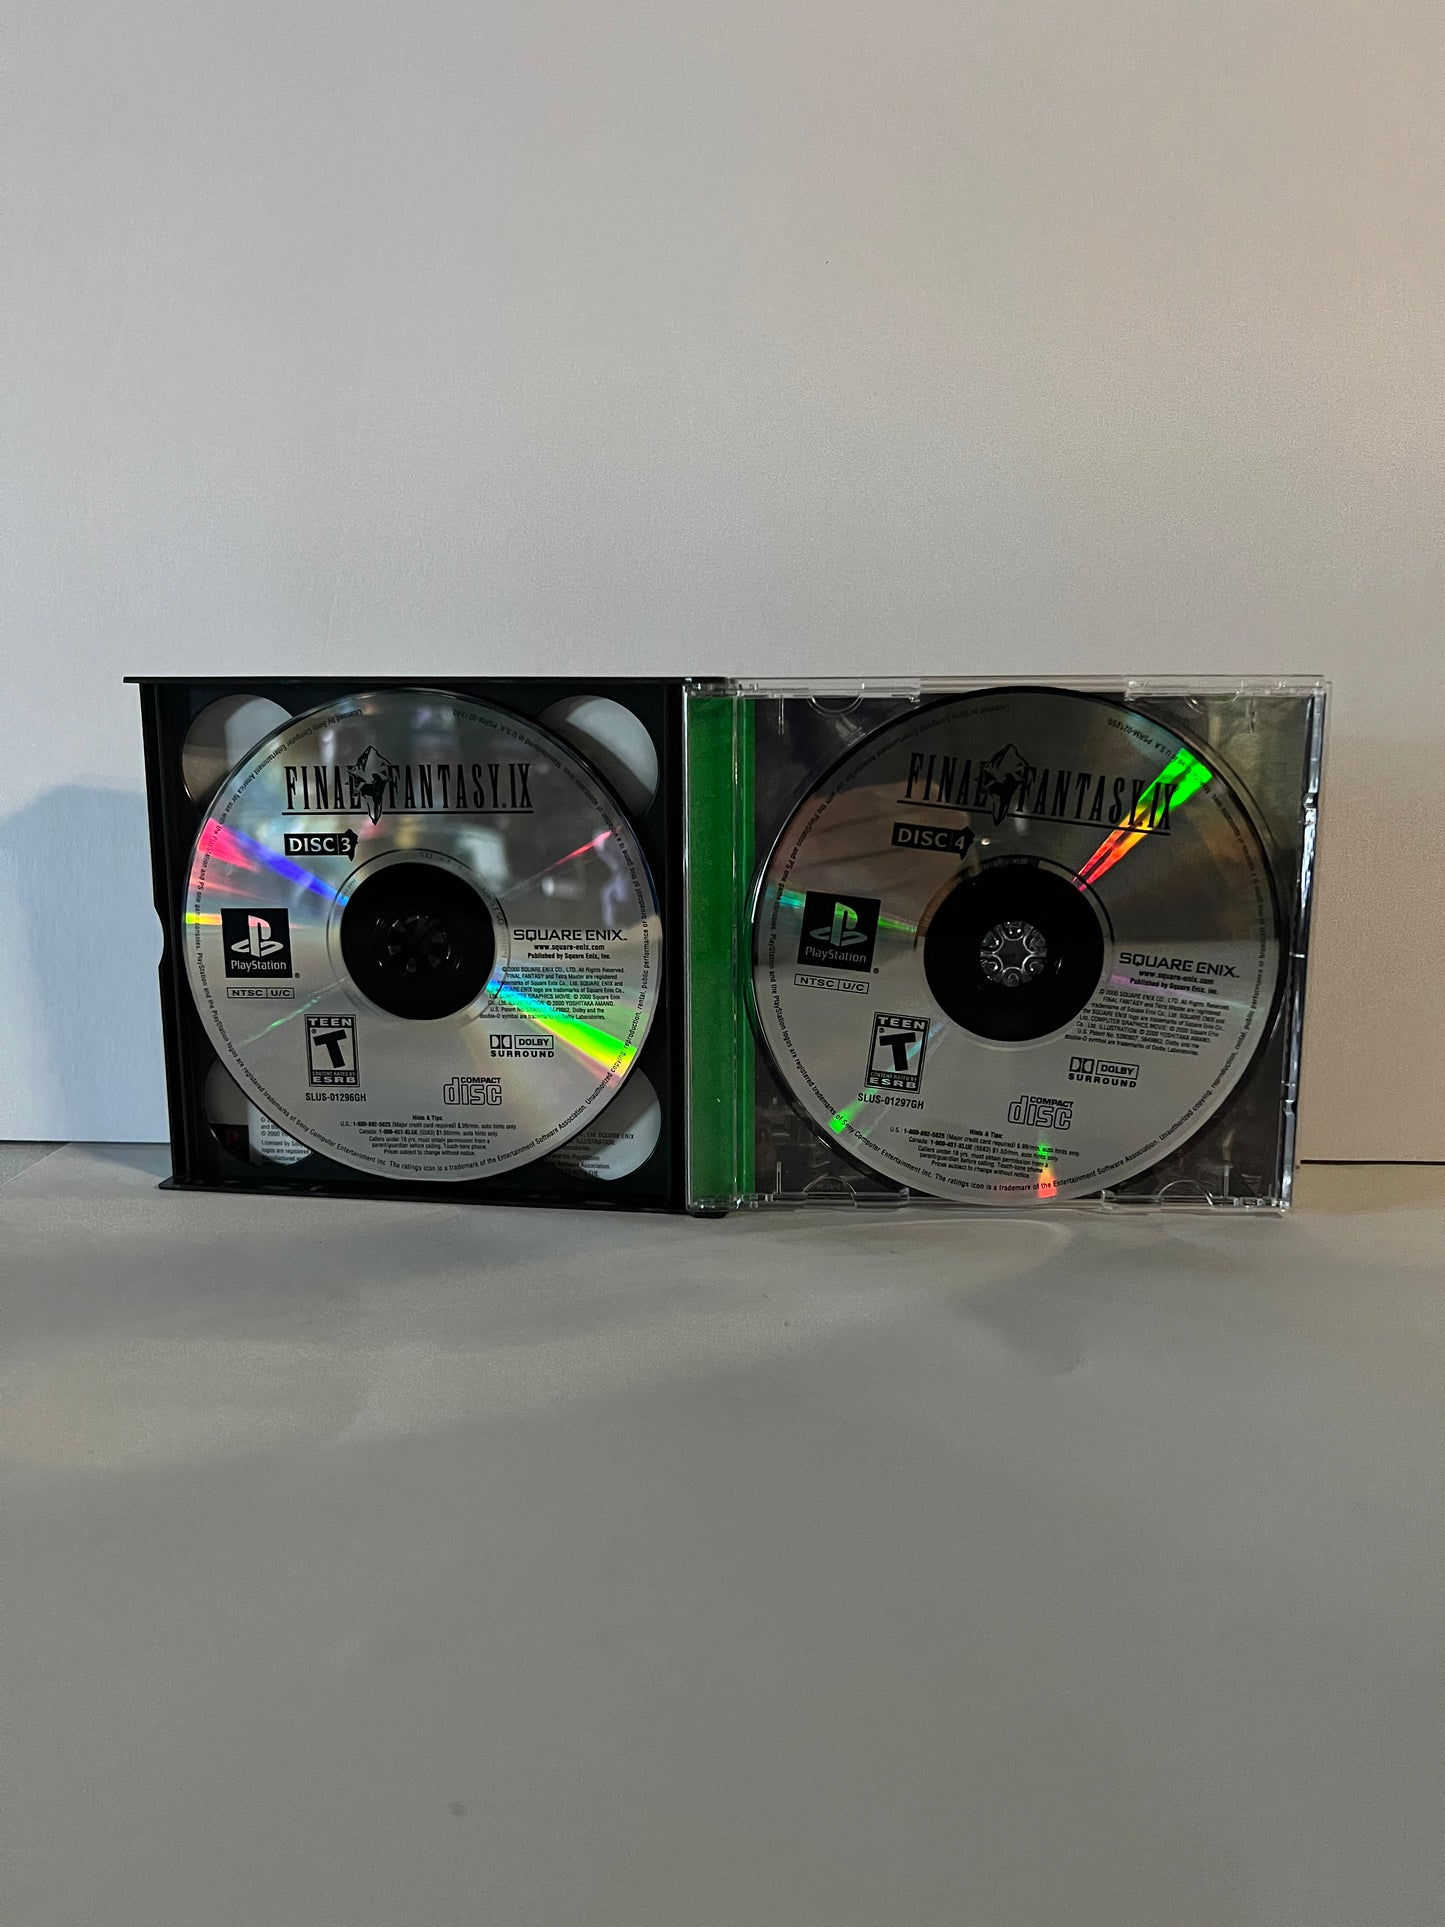 Final Fantasy IX - PS1 Game - Used